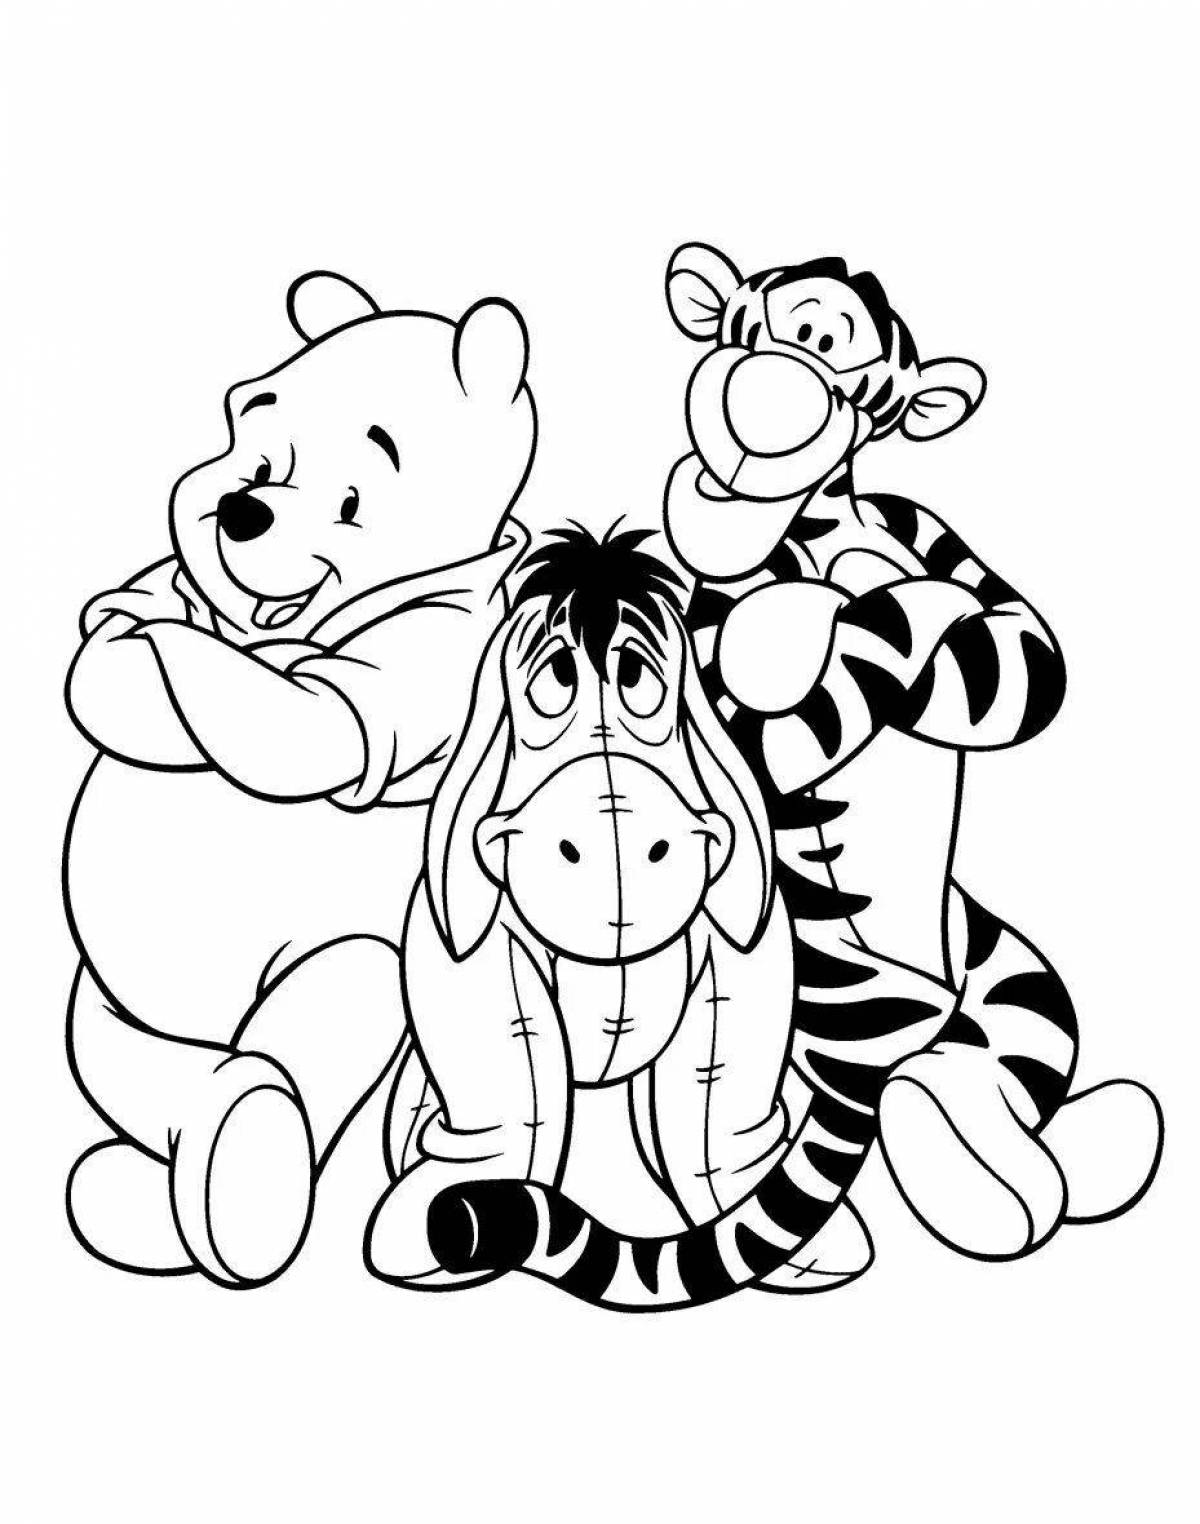 Coloring happy winnie the pooh